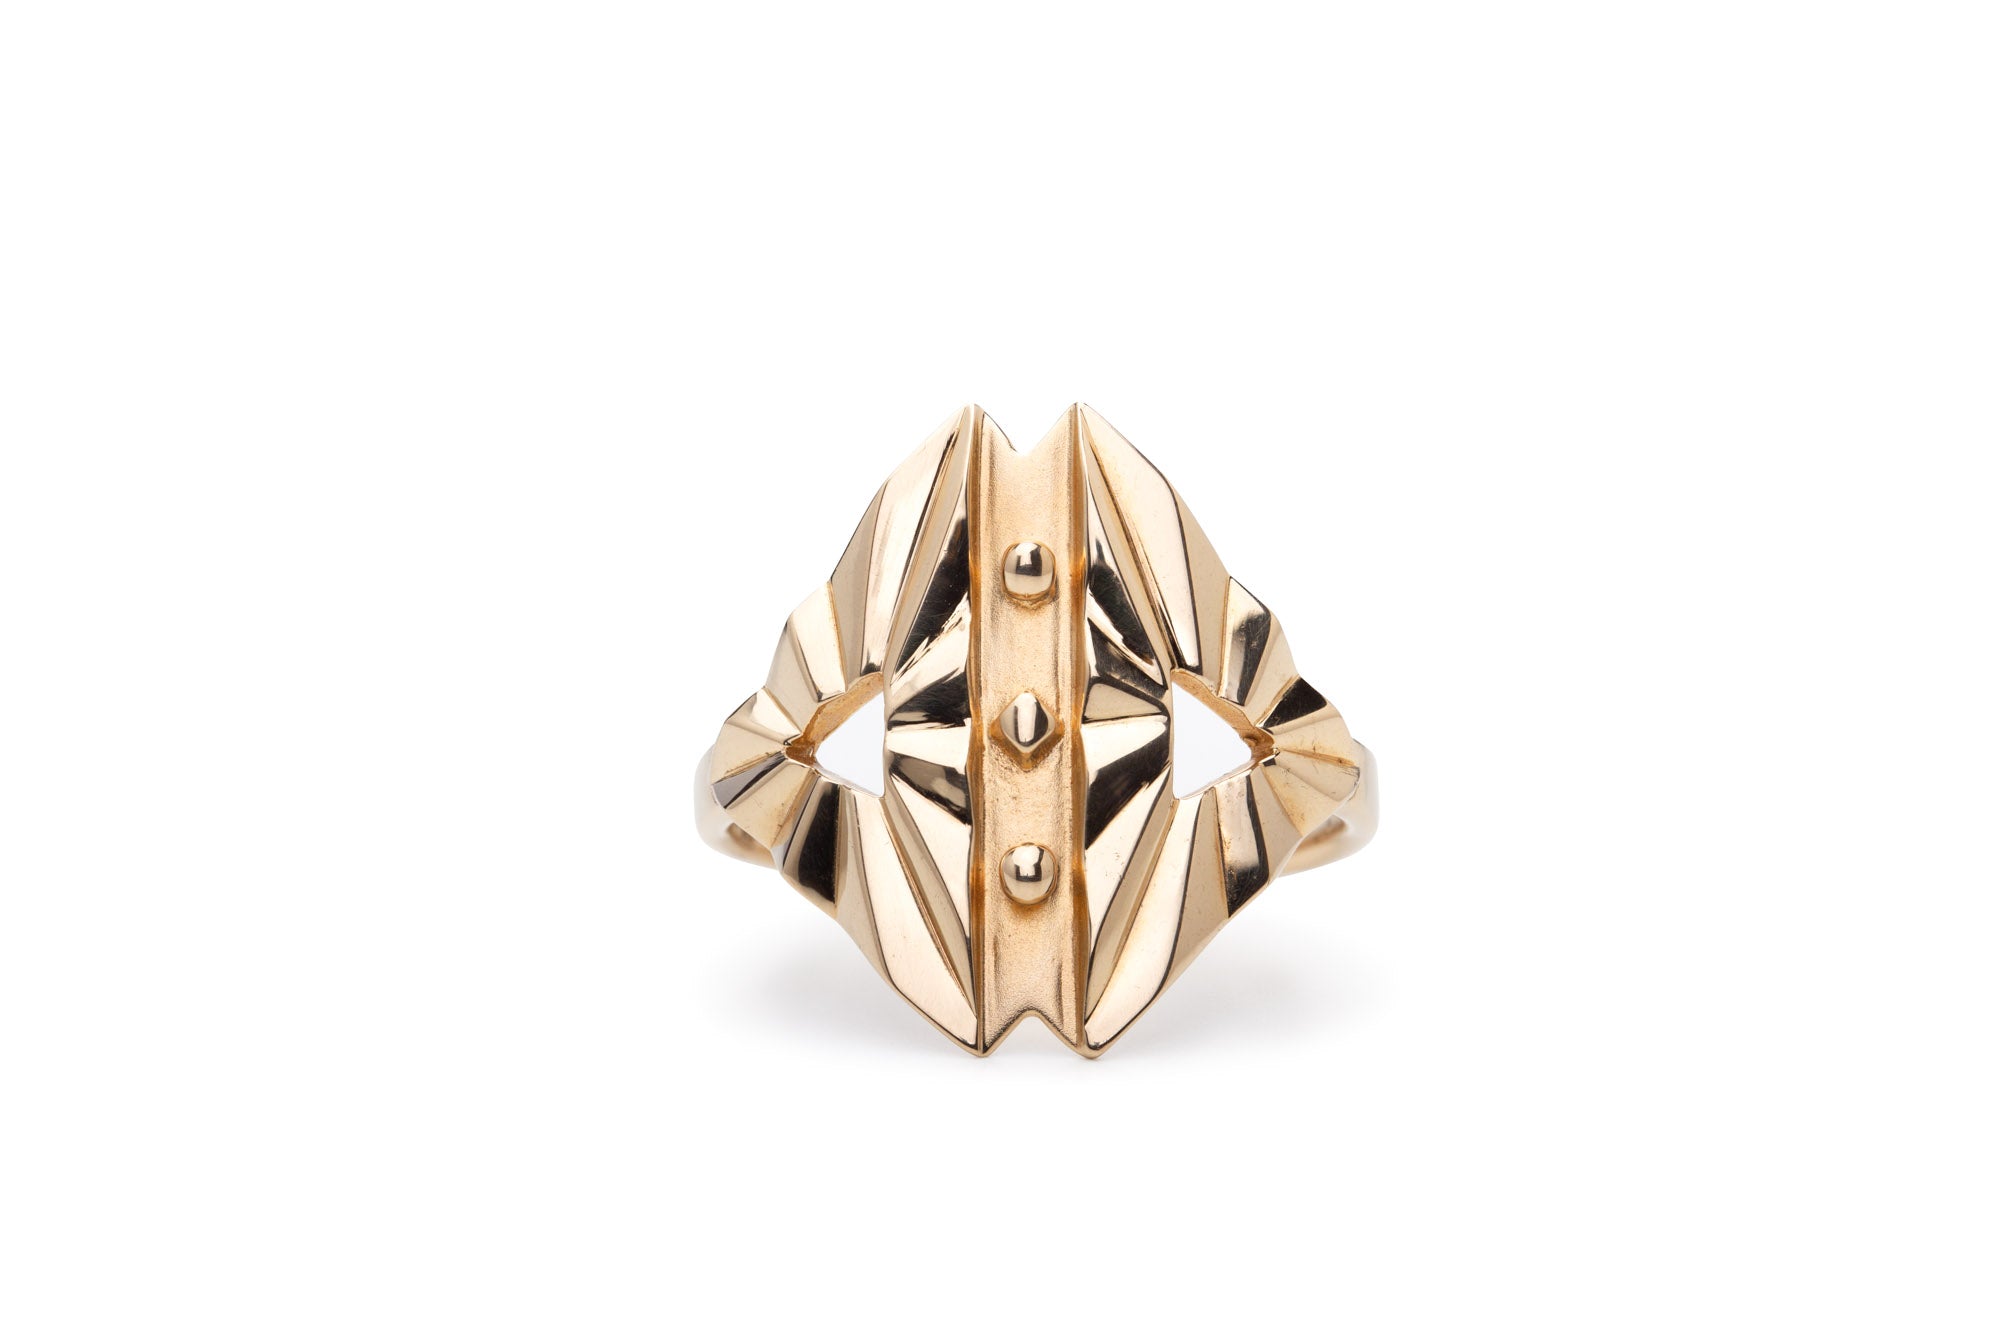 Super Butterfly Gold Ring